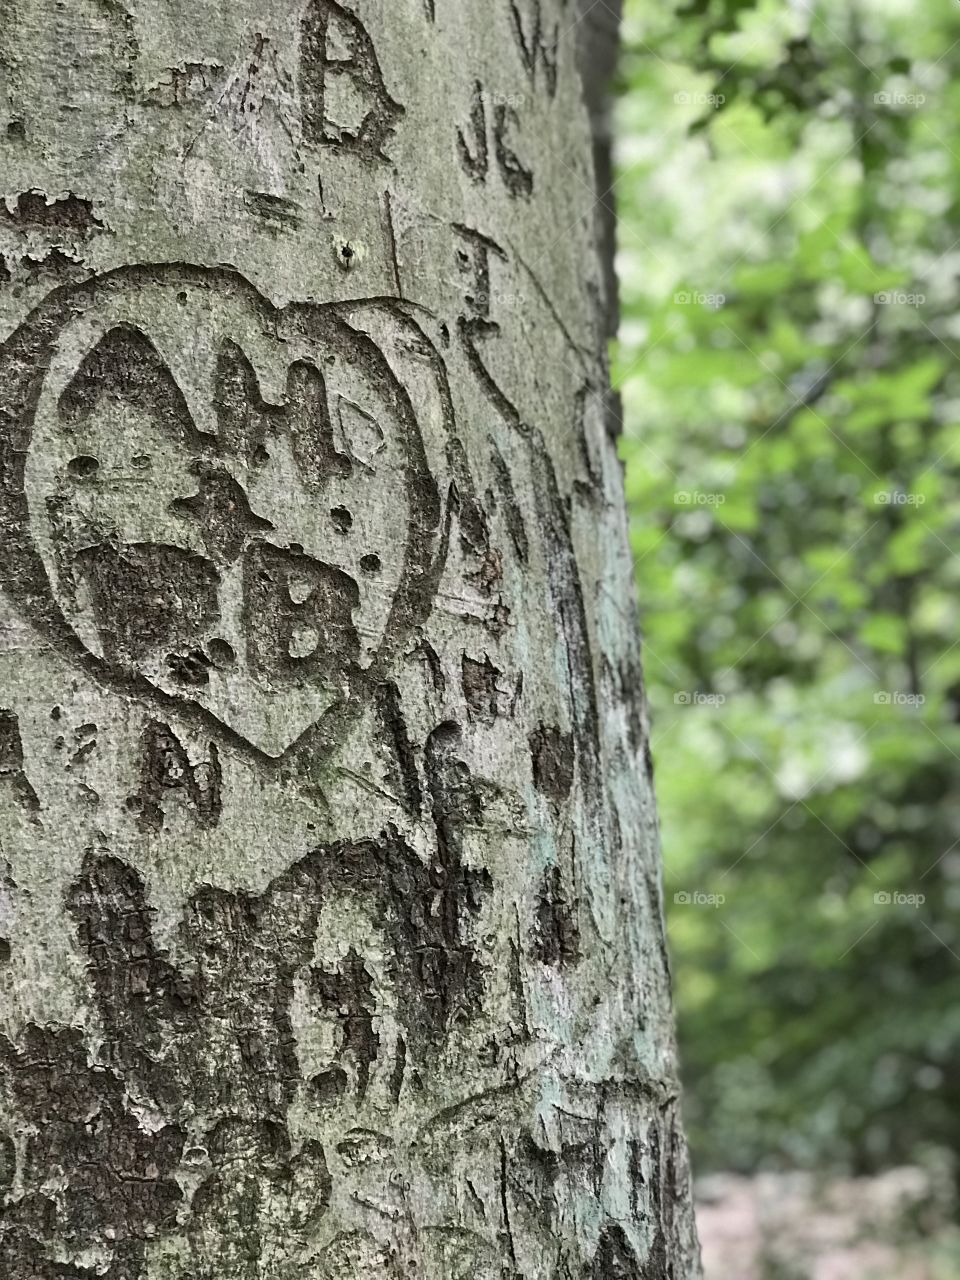 Carved love into a tree